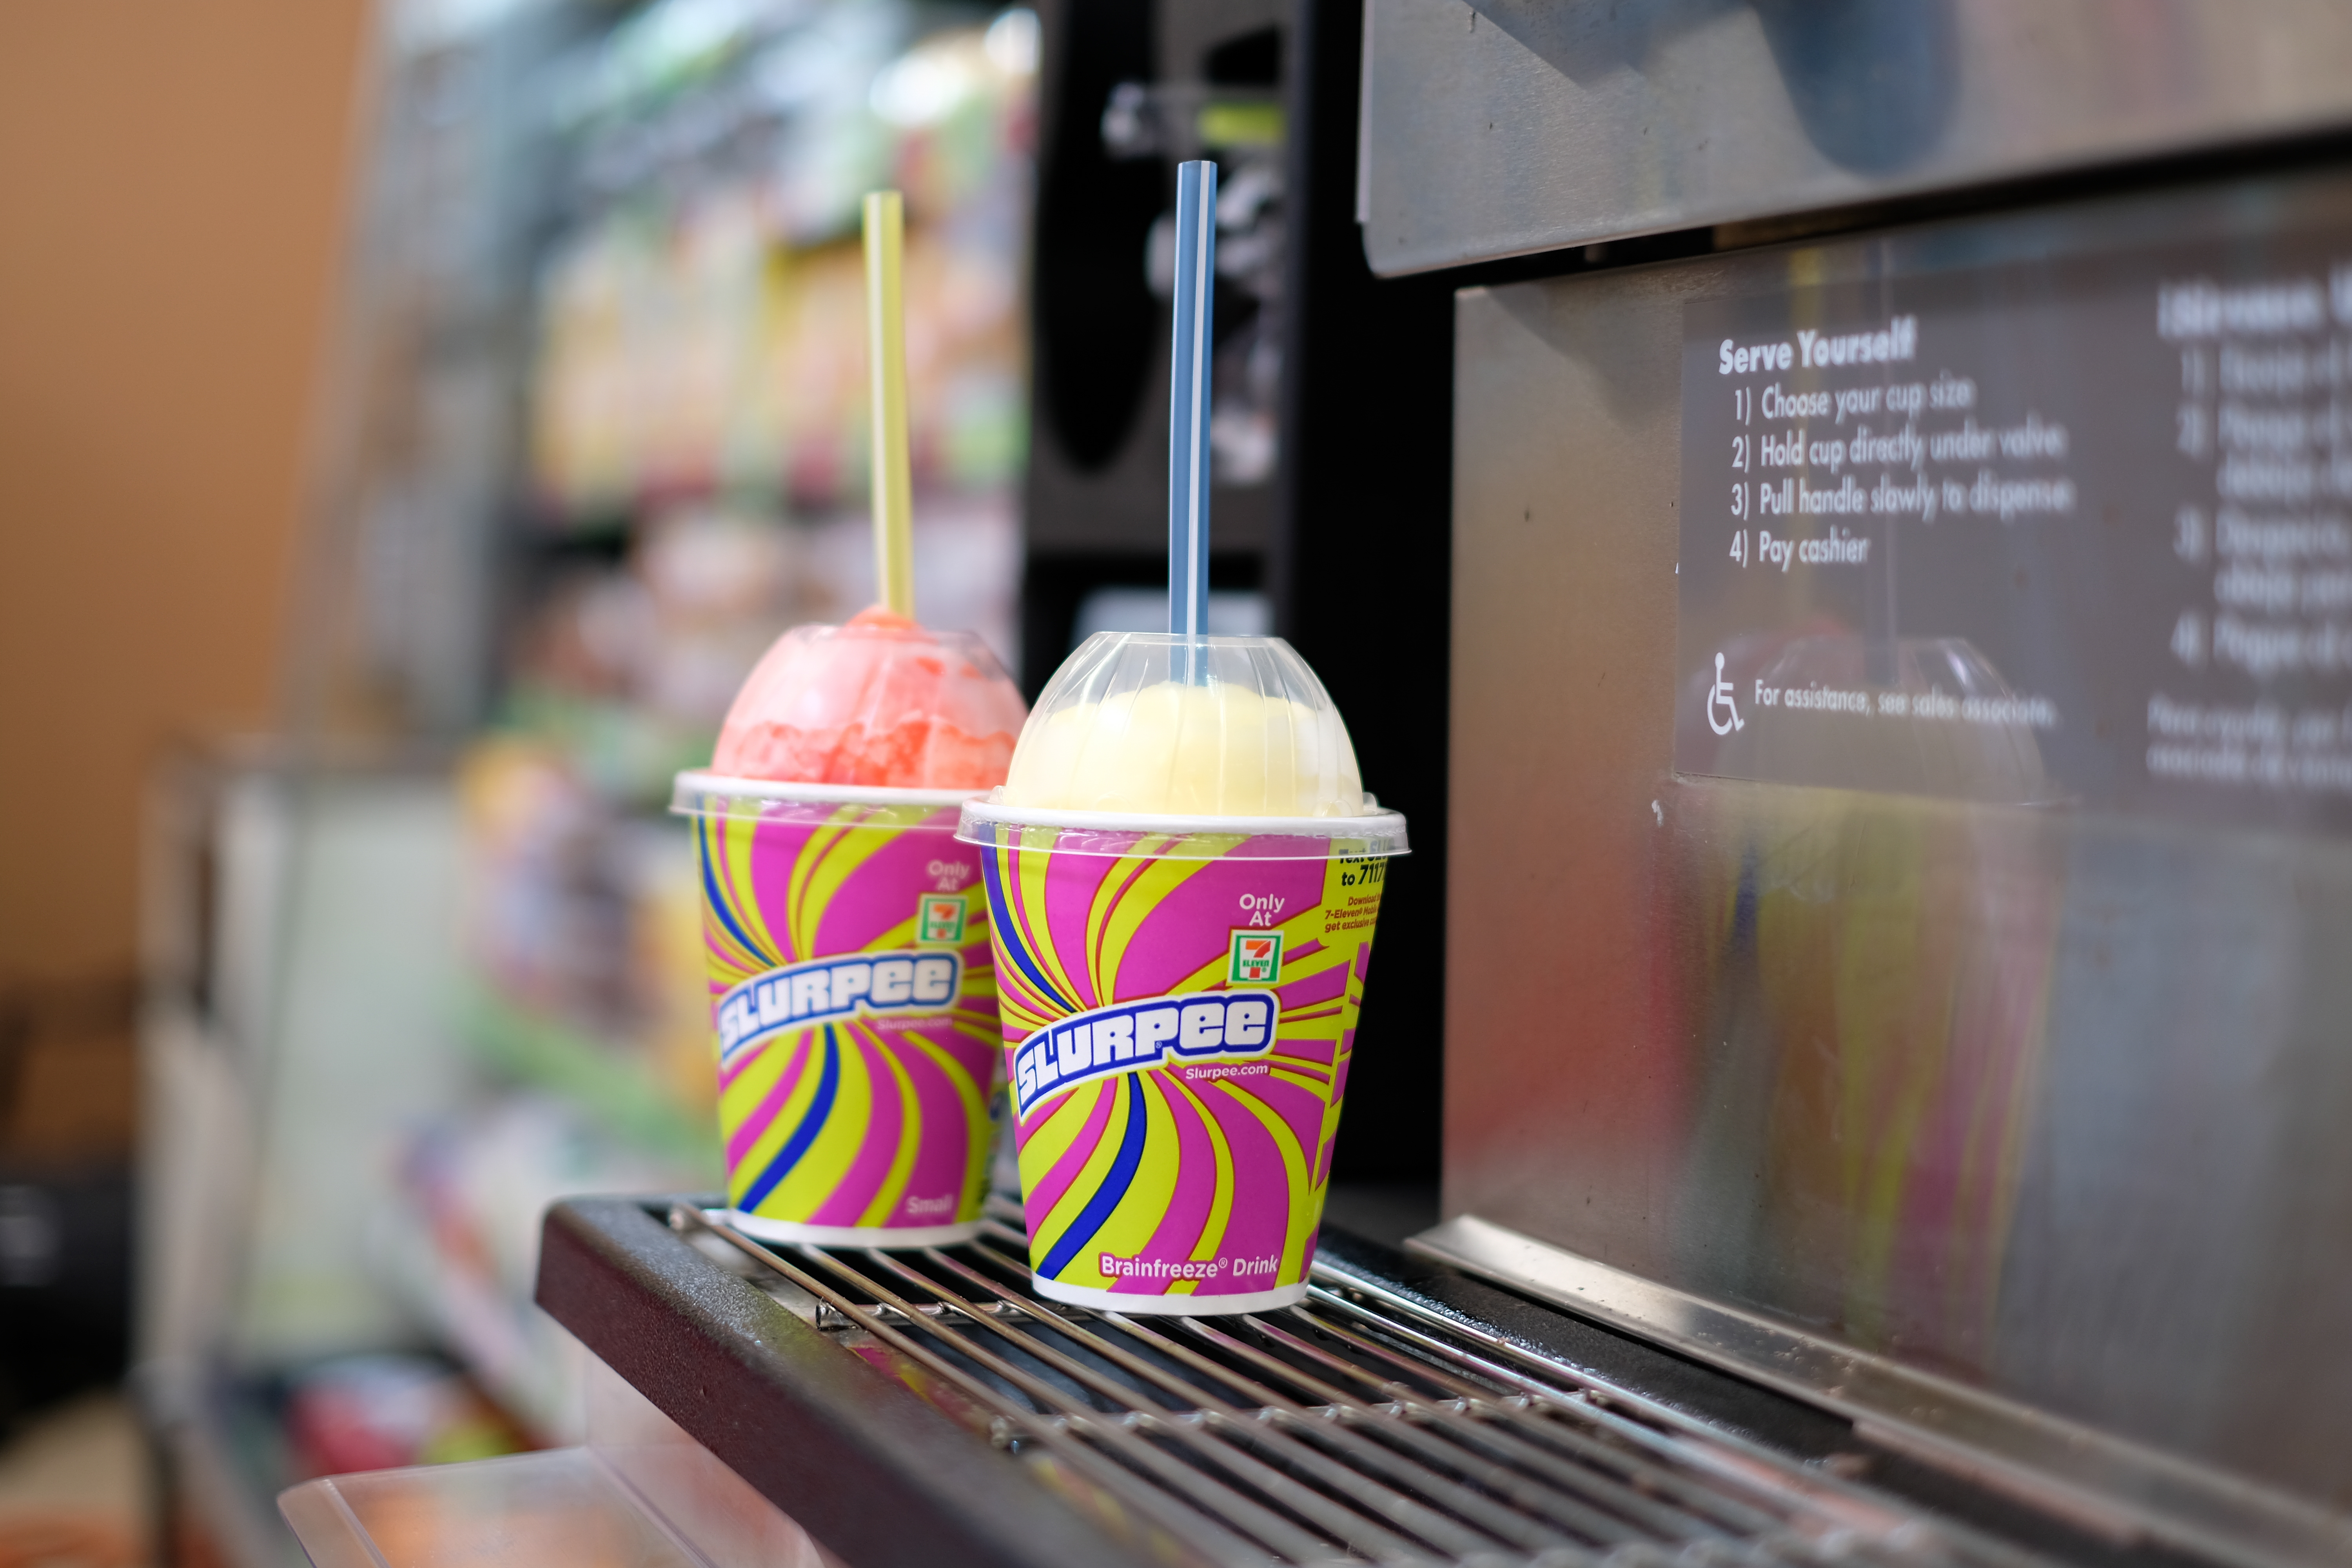 Love 7-Eleven Slurpees? Bring Your Own Cup Day Coming Up